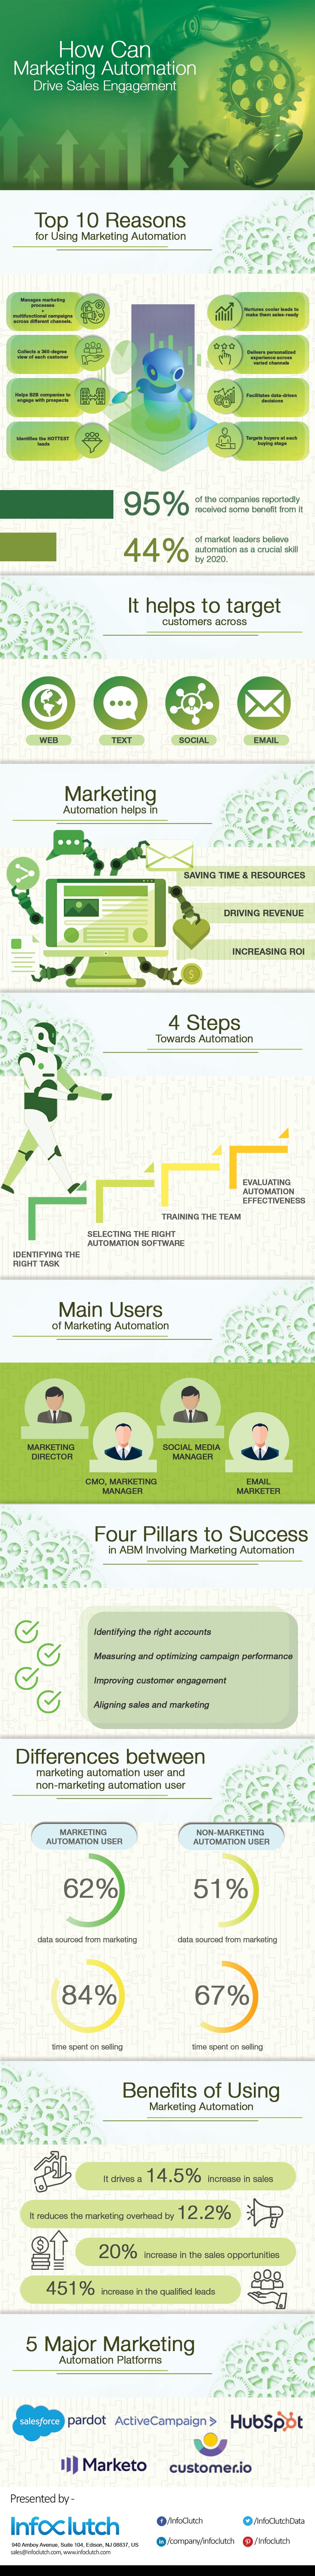 How can Marketing Automation drive sales engagement? #infographic